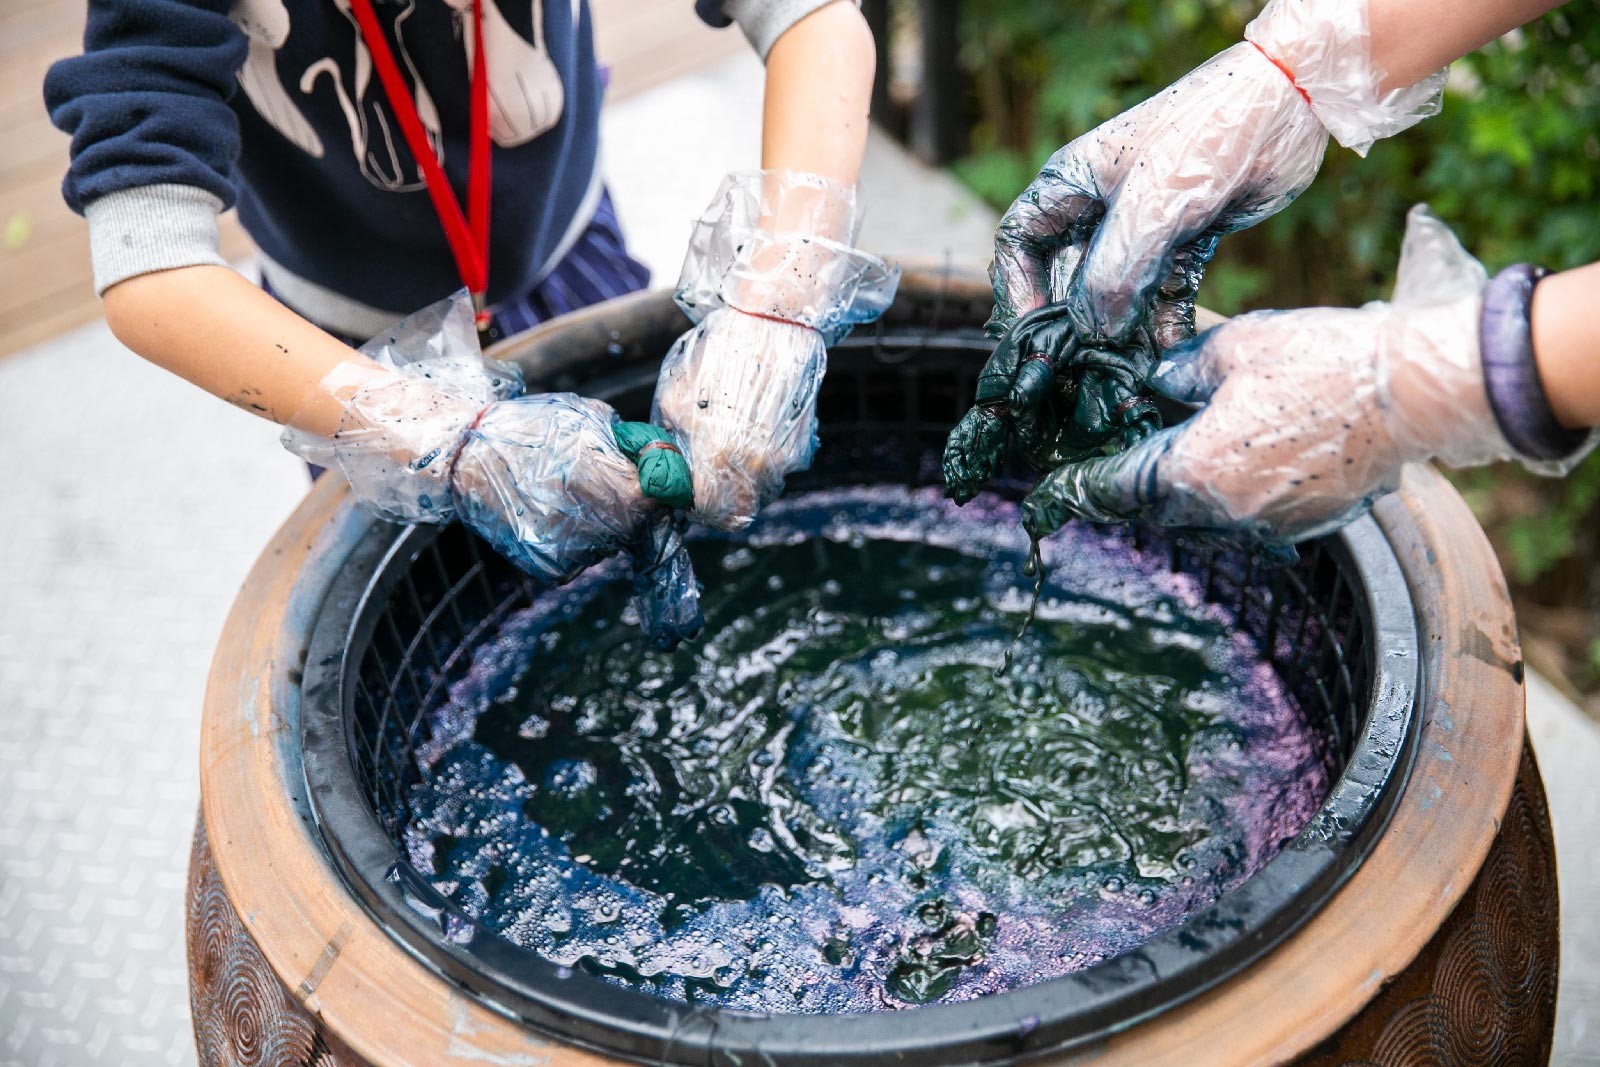 Culture Art and Nature Co., Ltd.: Lecturers lead the students to experience the charm of making dyes and tie-dyes.